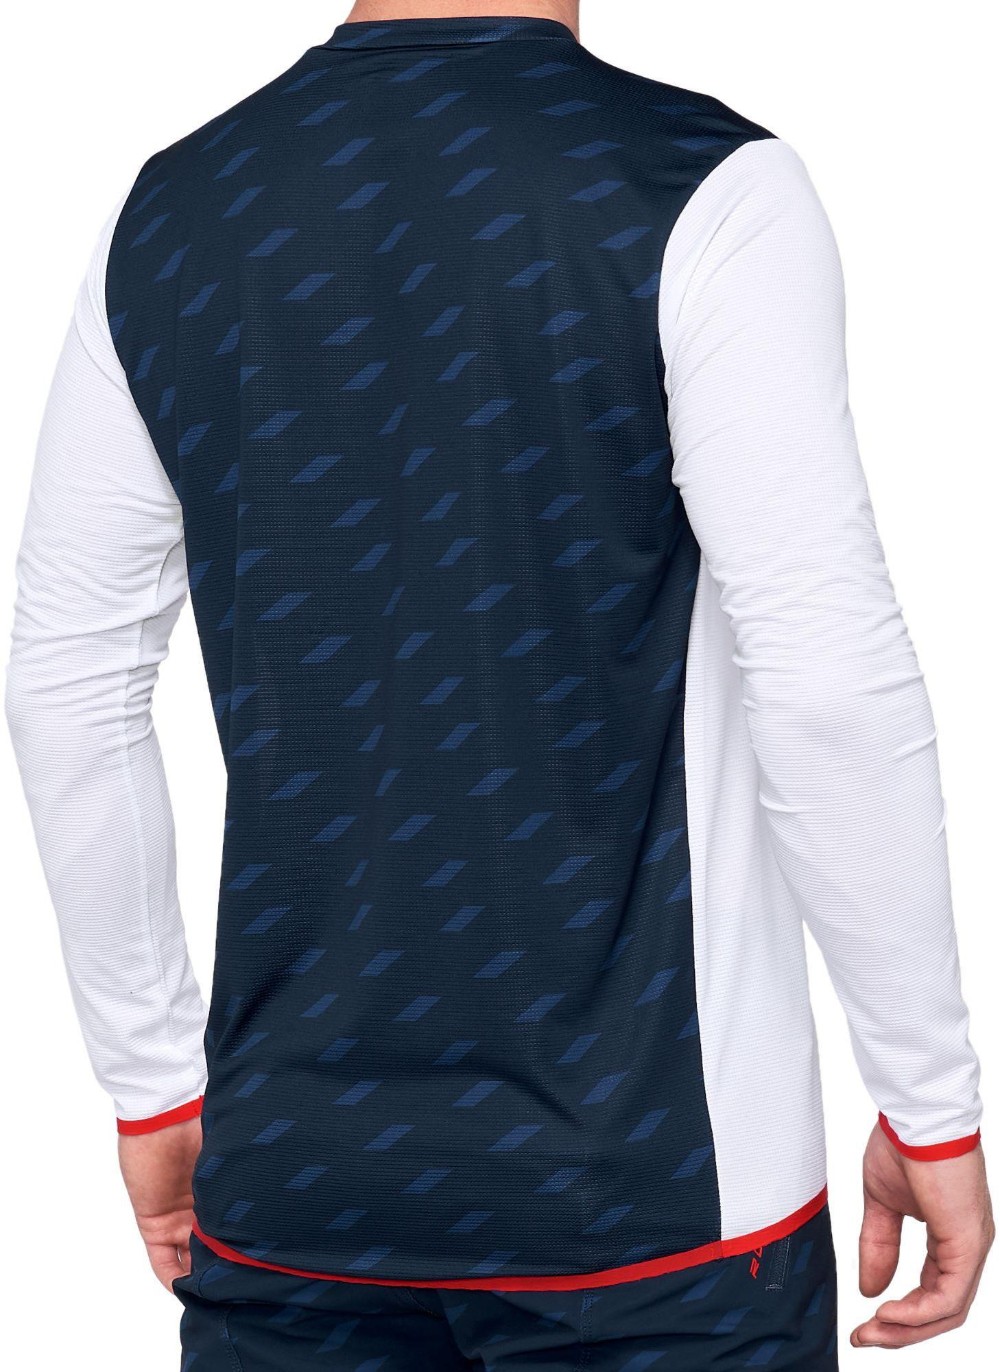 R-Core X Limited Edition Long Sleeve Jersey image 1